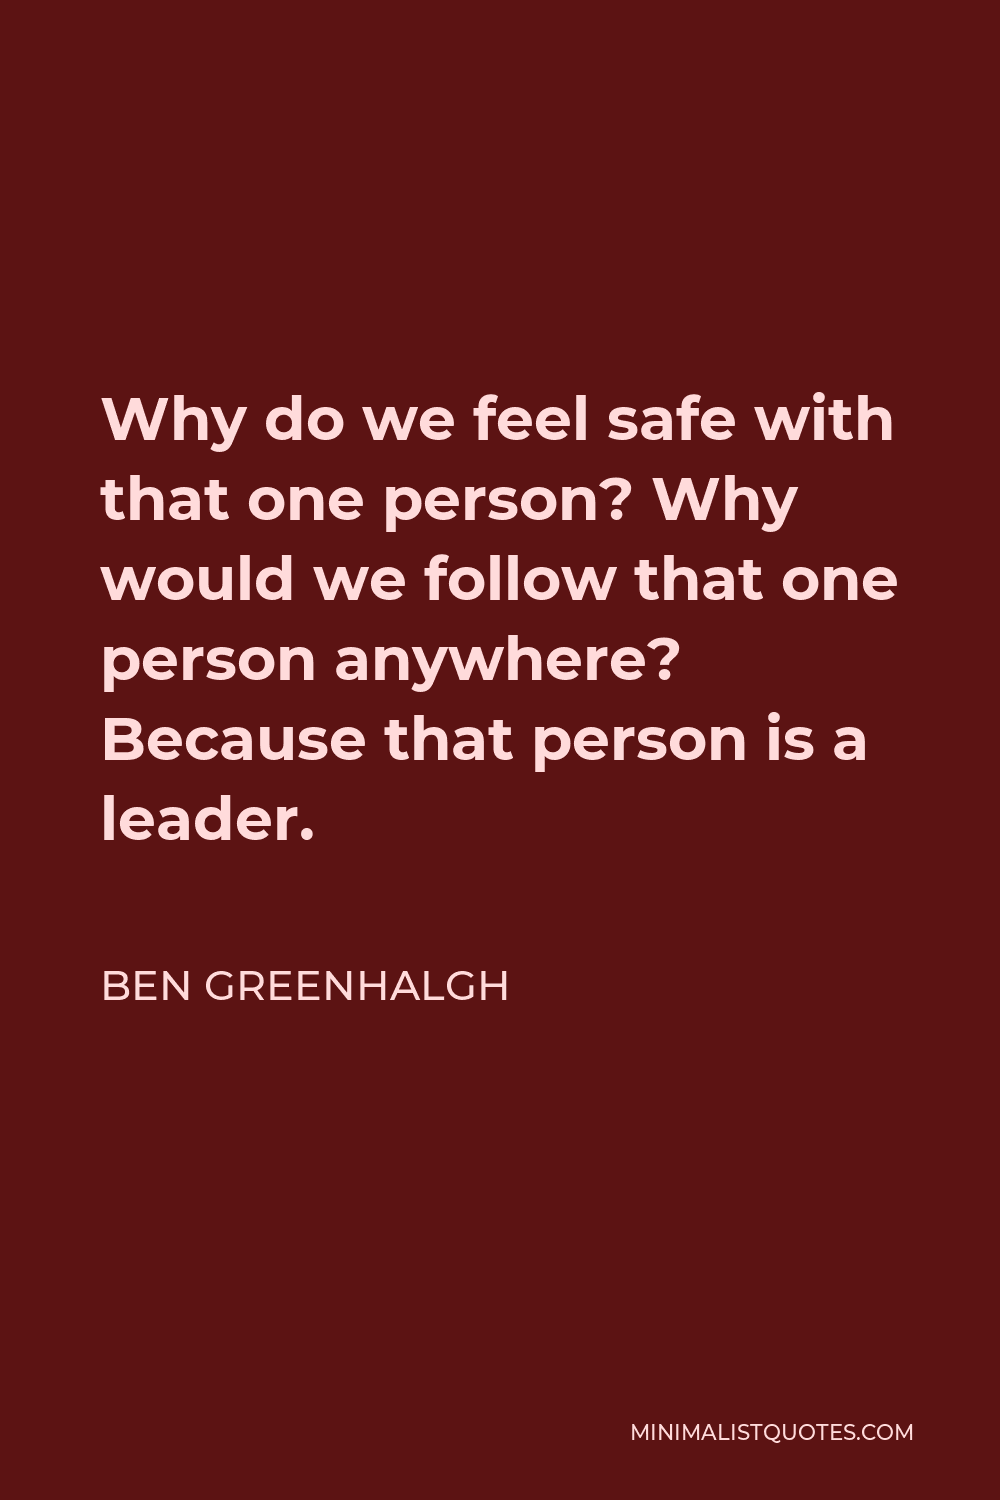 Ben Greenhalgh Quote - Why do we feel safe with that one person? Why would we follow that one person anywhere? Because that person is a leader.